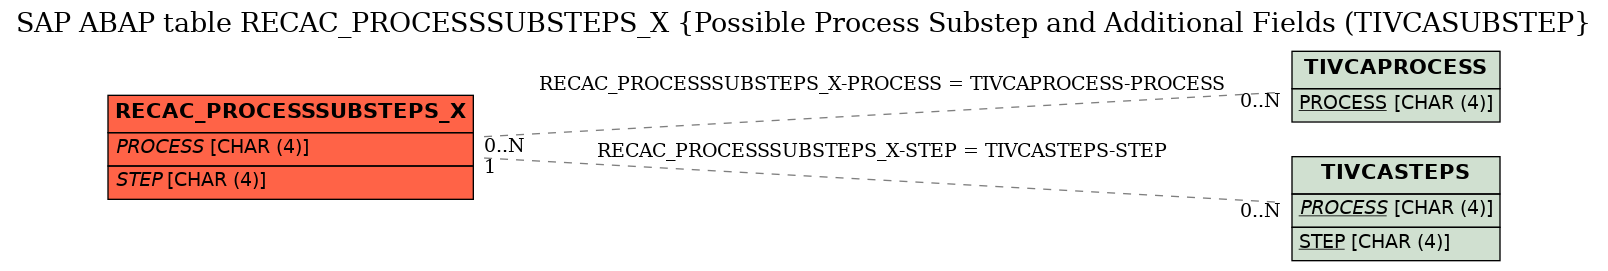 E-R Diagram for table RECAC_PROCESSSUBSTEPS_X (Possible Process Substep and Additional Fields (TIVCASUBSTEP)